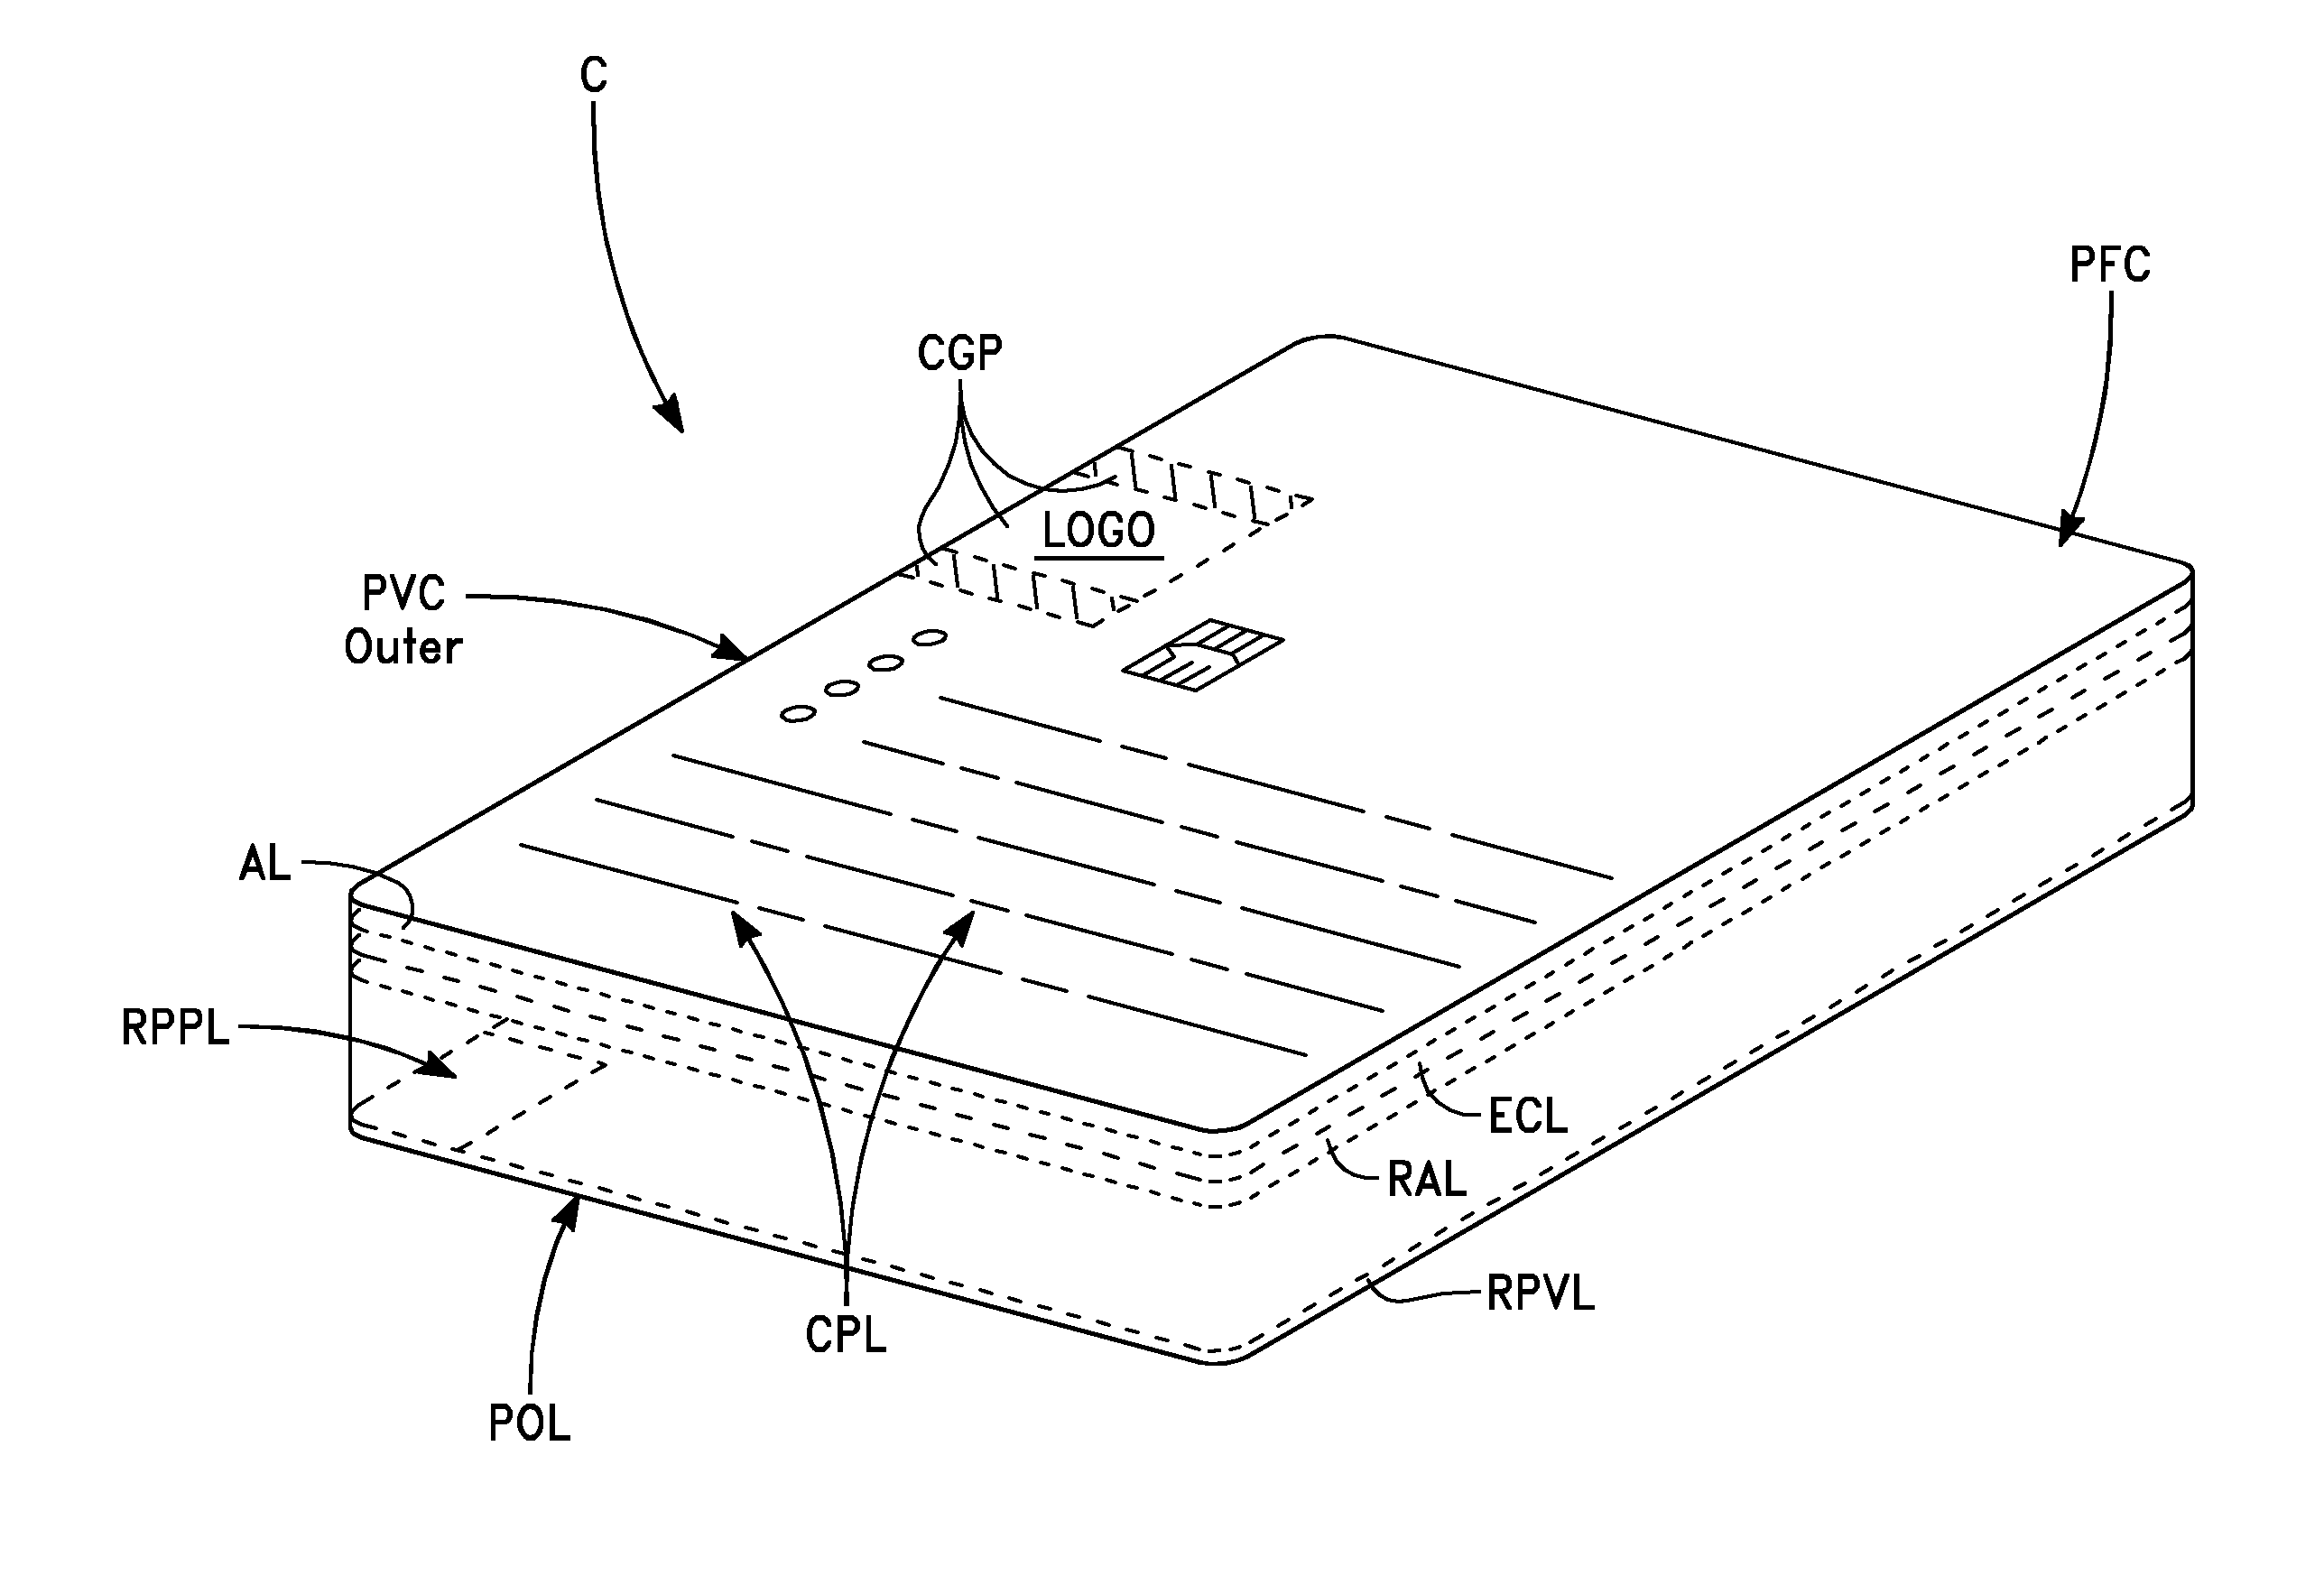 Conducting a Transaction with an Electronic Card